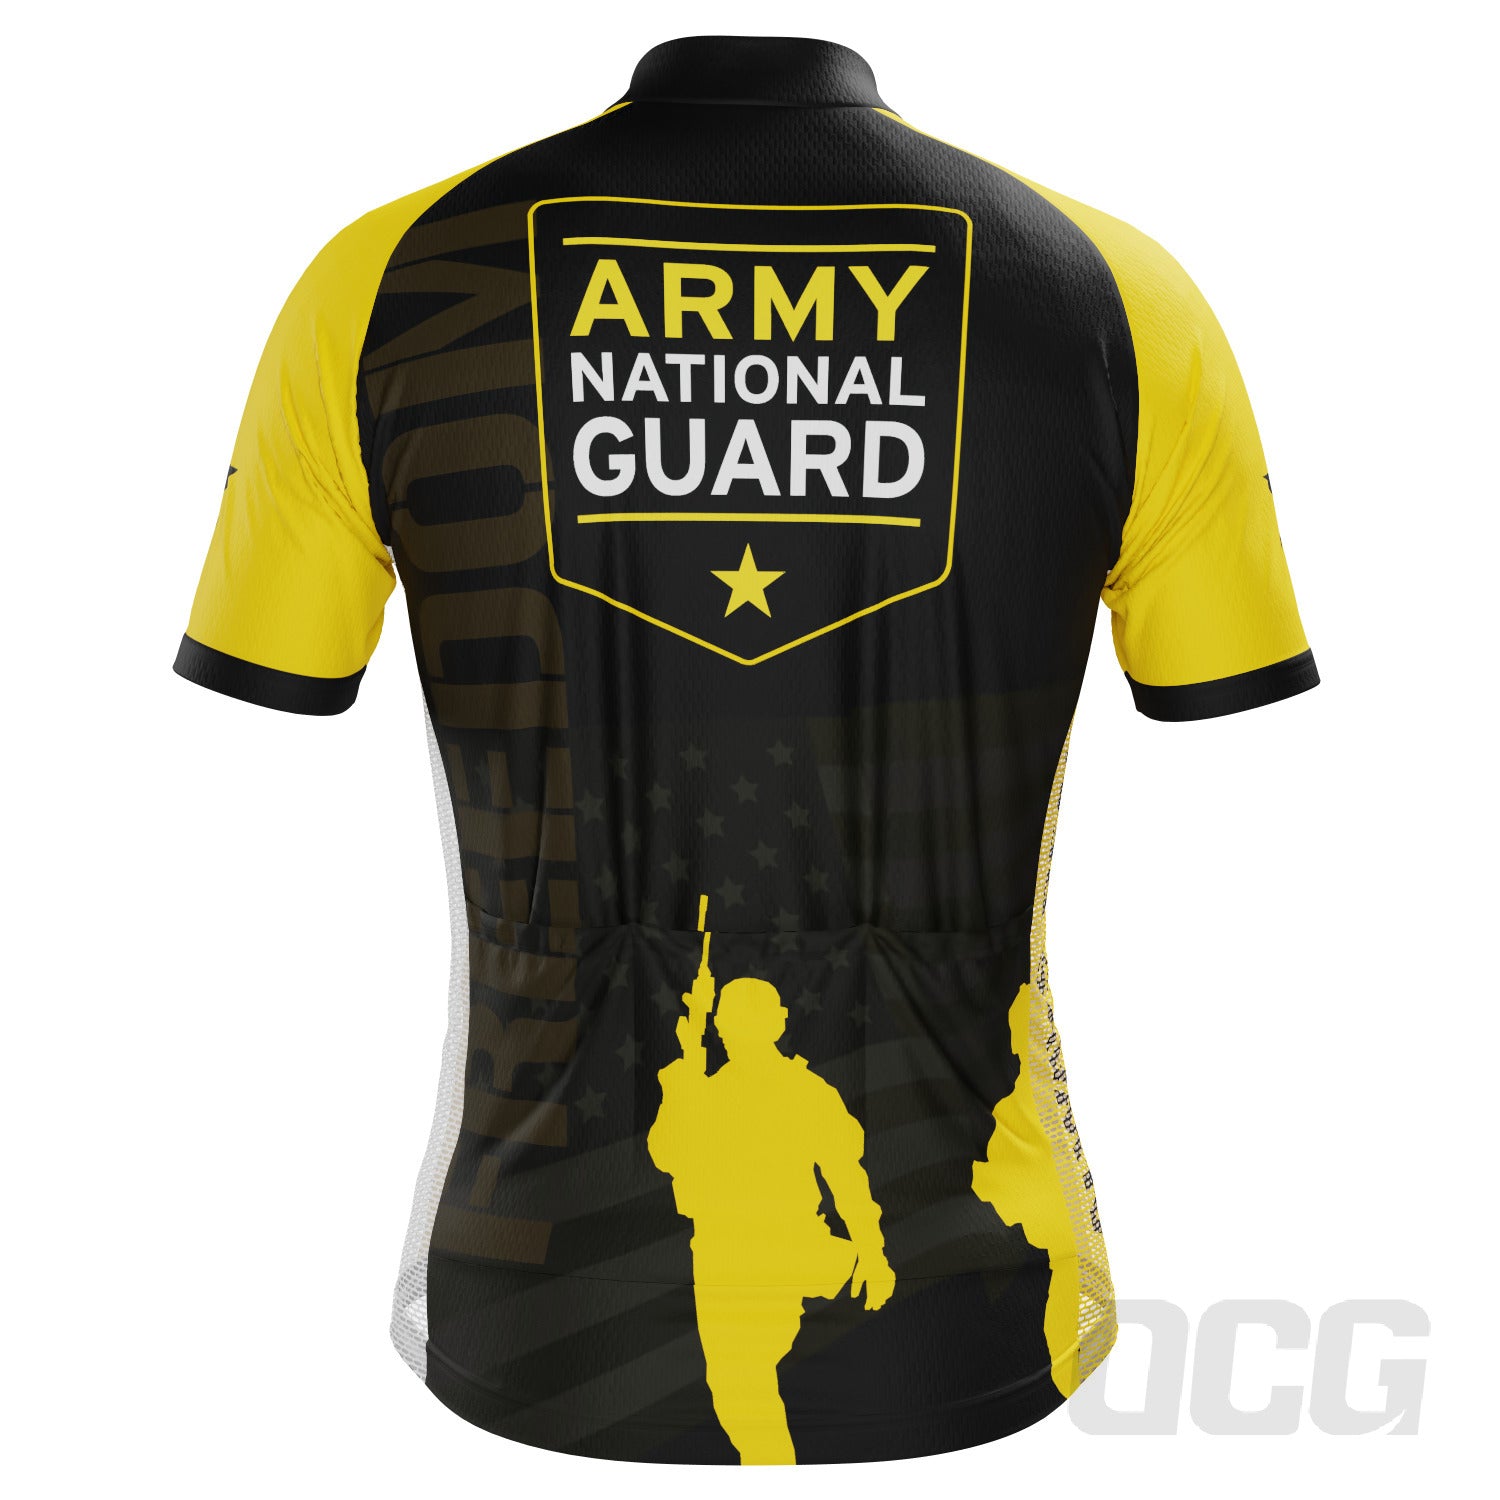 Men's USAF Army National Guard Short Sleeve Cycling Jersey